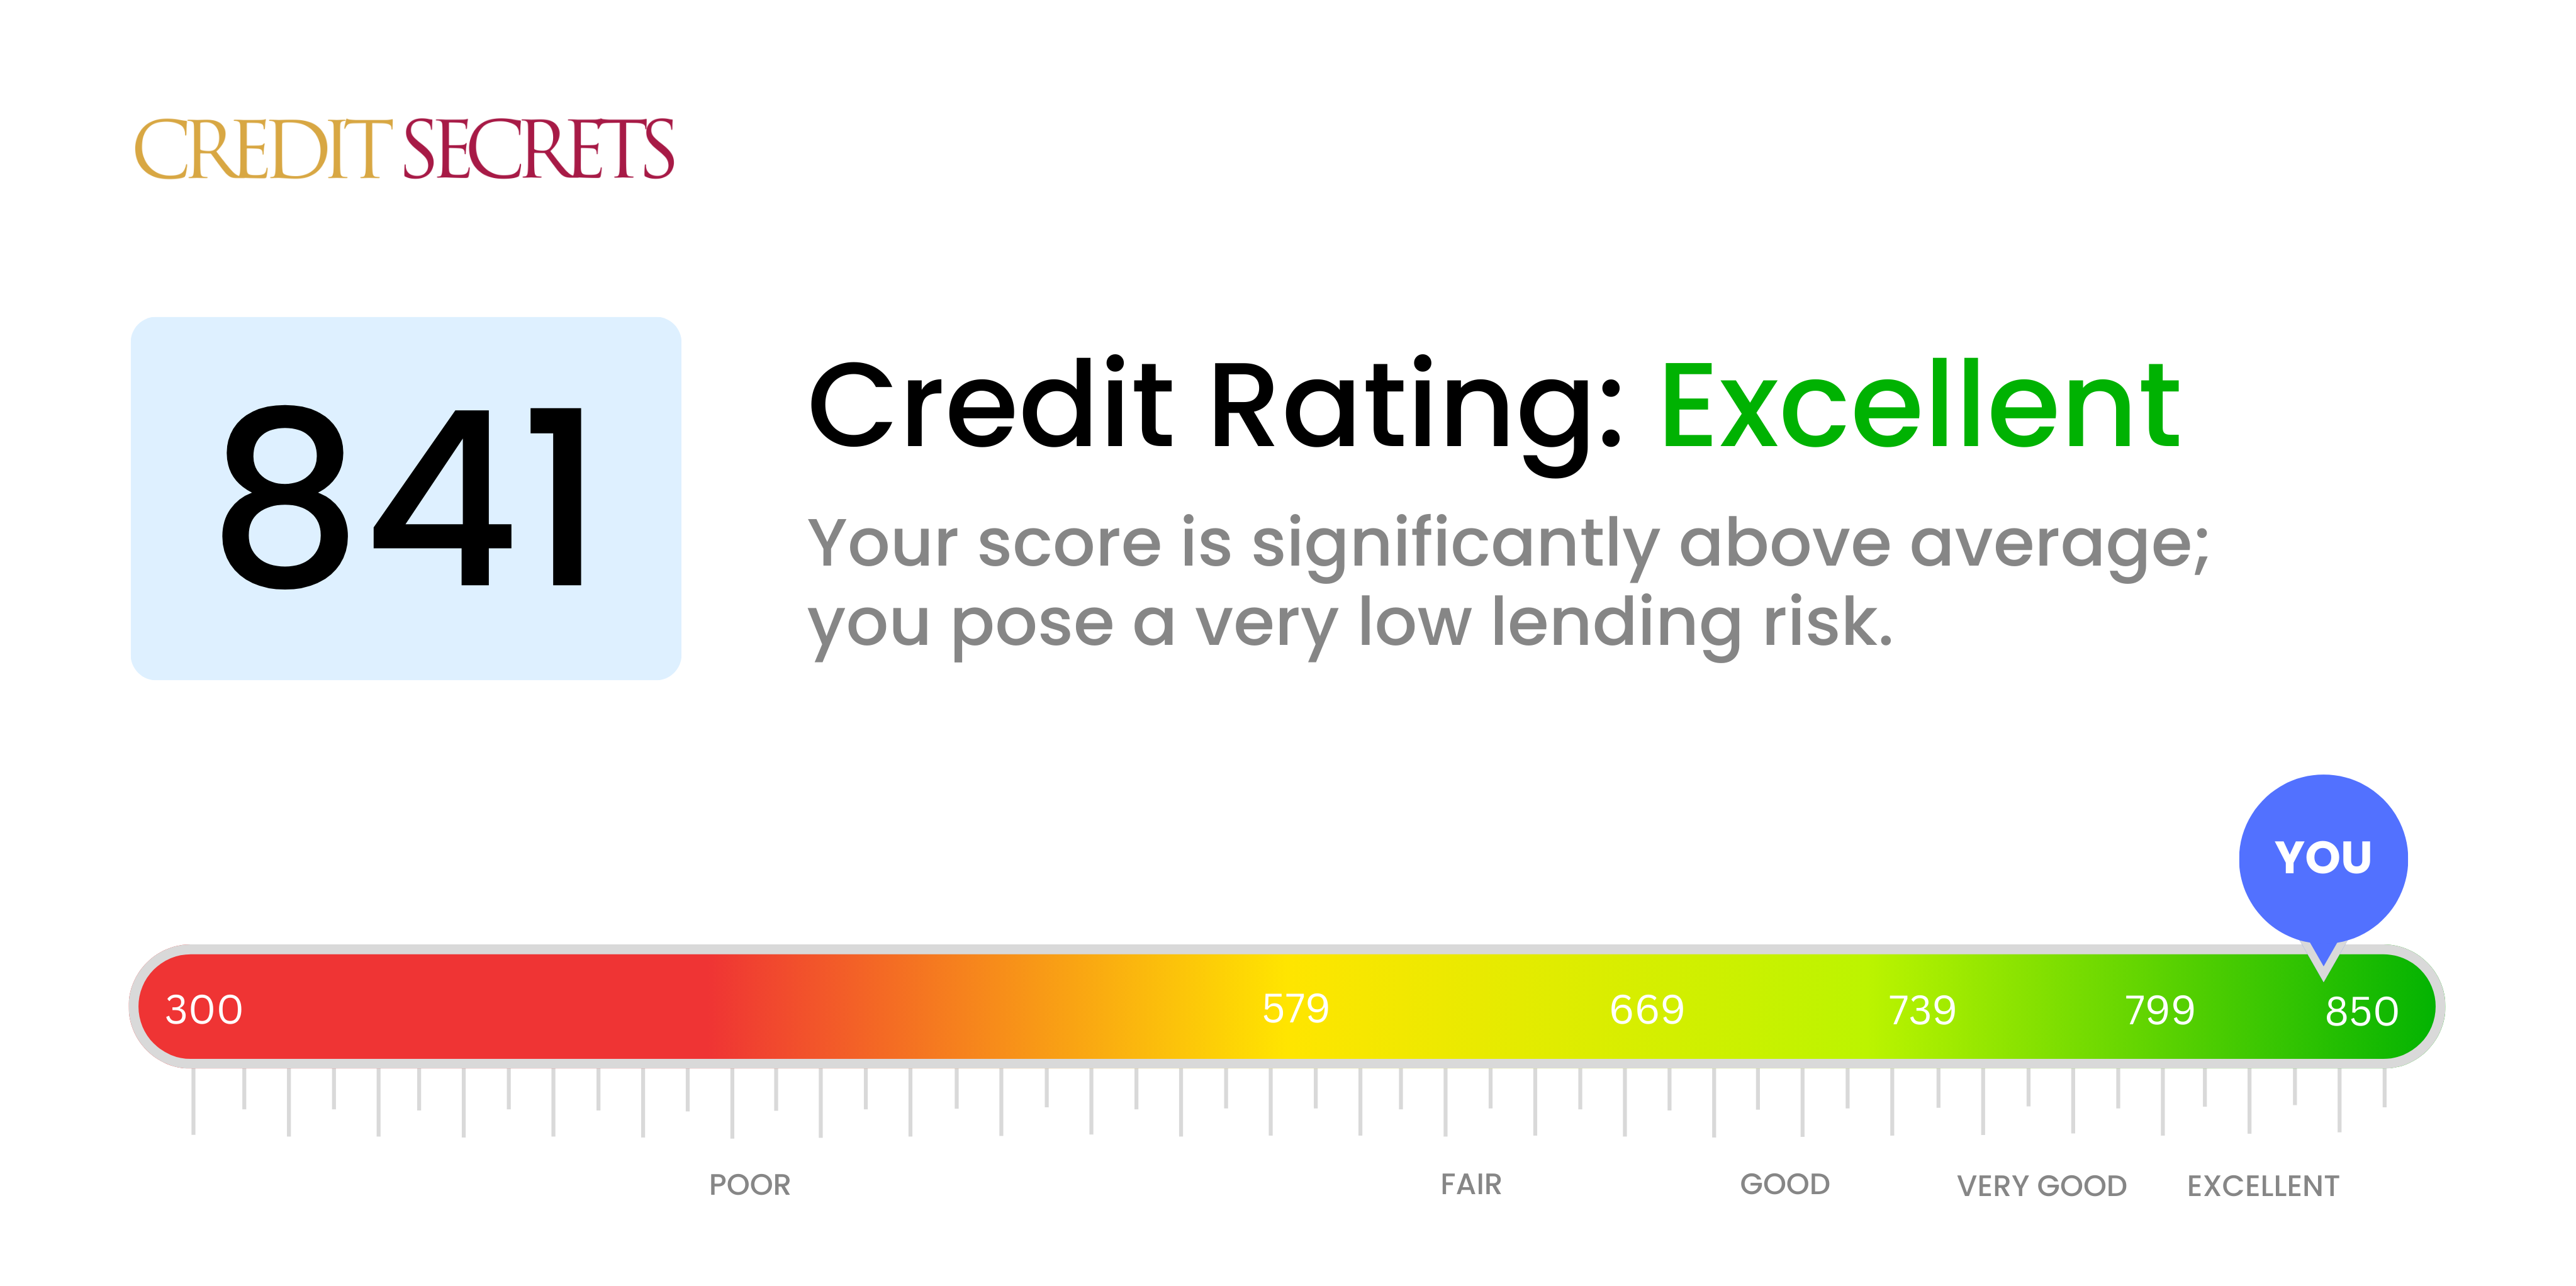 Is 841 a good credit score?